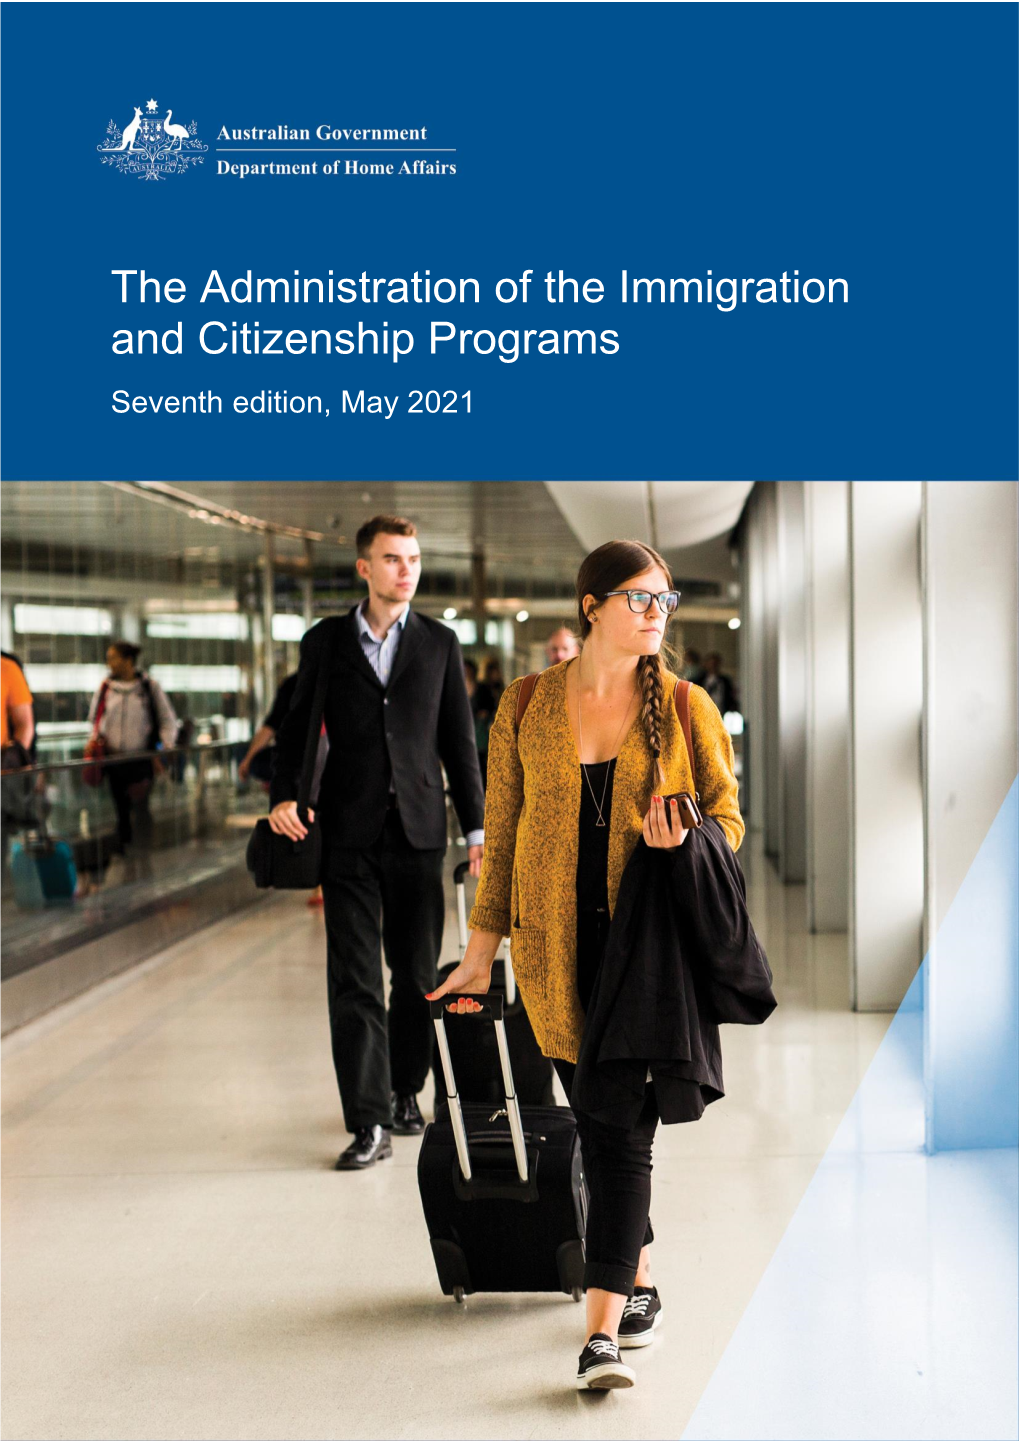 The Administration of the Immigration and Citizenship Programs Seventh Edition, May 2021